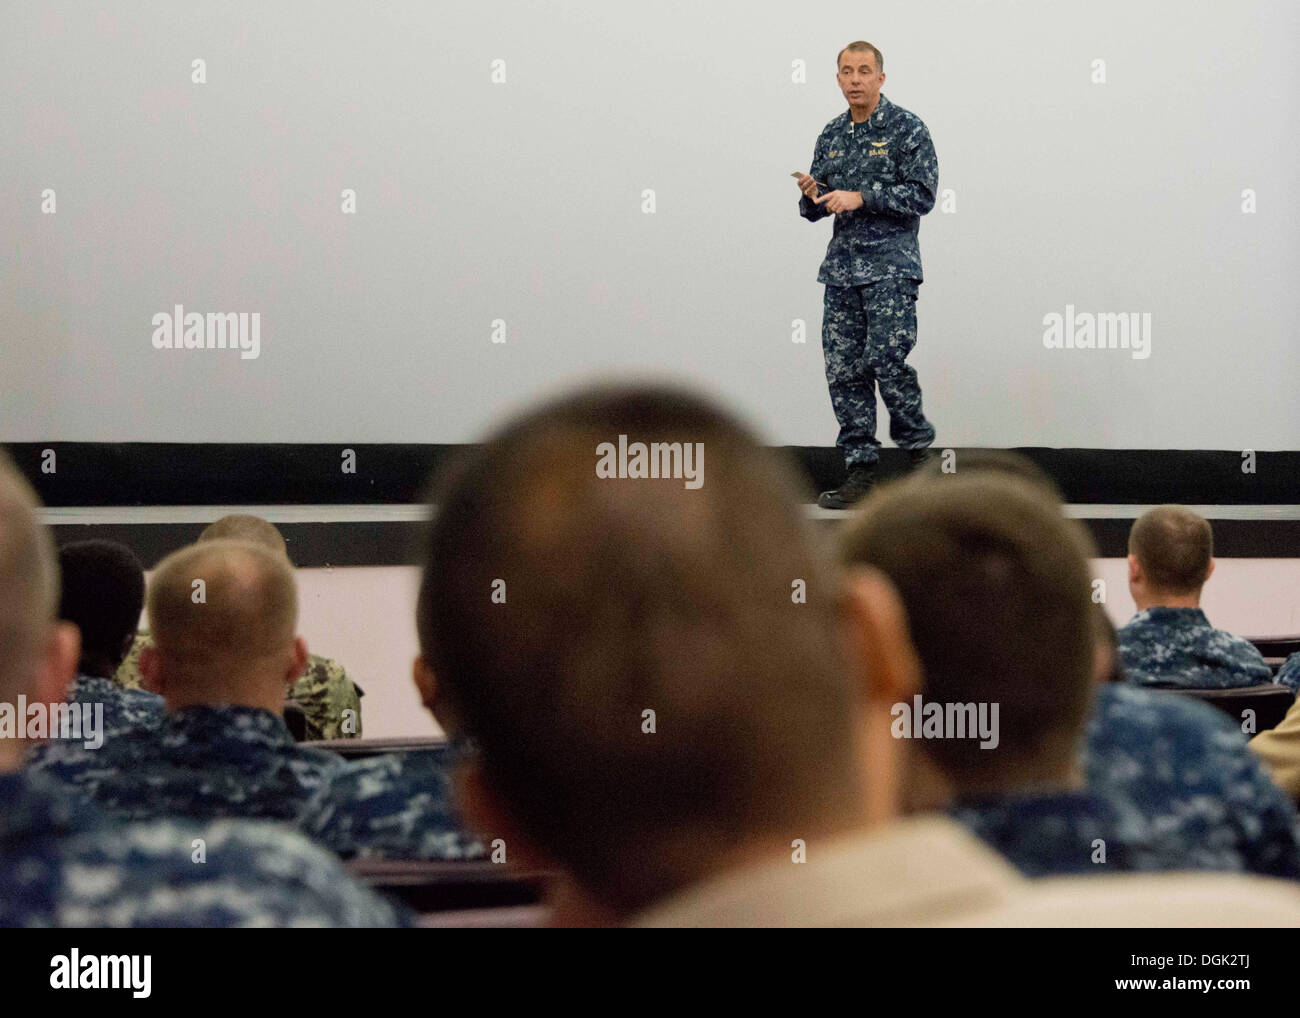 NAVAL AIR FACILITY ATSUGI, Japan (Oct. 9, 2013) – Commander, U.S. Naval Forces Japan (CNFJ) Rear Adm. Terry Kraft addresses Sailors during an all hands call at Naval Air Facility Atsugi’s Cinema 77. During his visit, Kraft discussed the importance of the Stock Photo